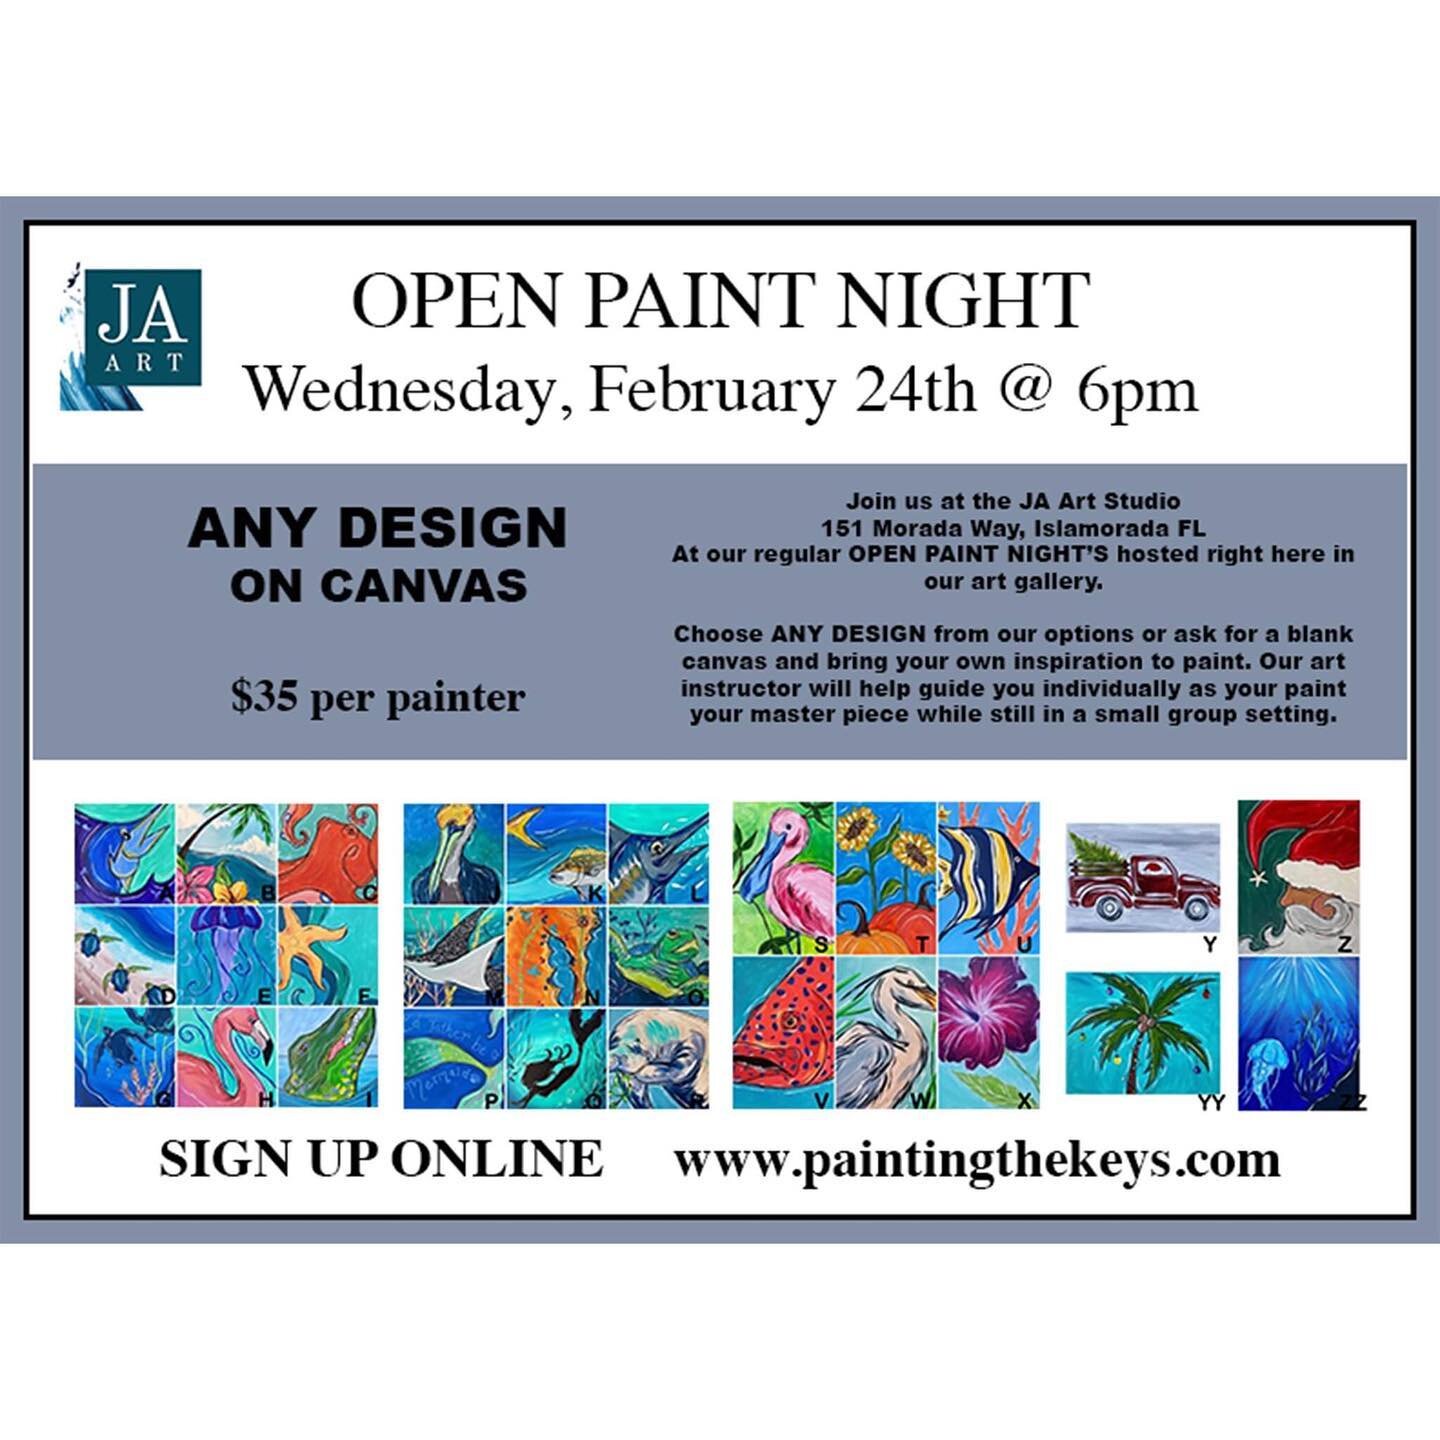 TODAY! 🤗
We have a very very small class today at our art studio. Open paint night means you get to choose ANY design you want!!
&bull;
Invite a friend or family member to tonight&rsquo;s class. 6pm start time at the JA Art Studio in Islamorada. Mus